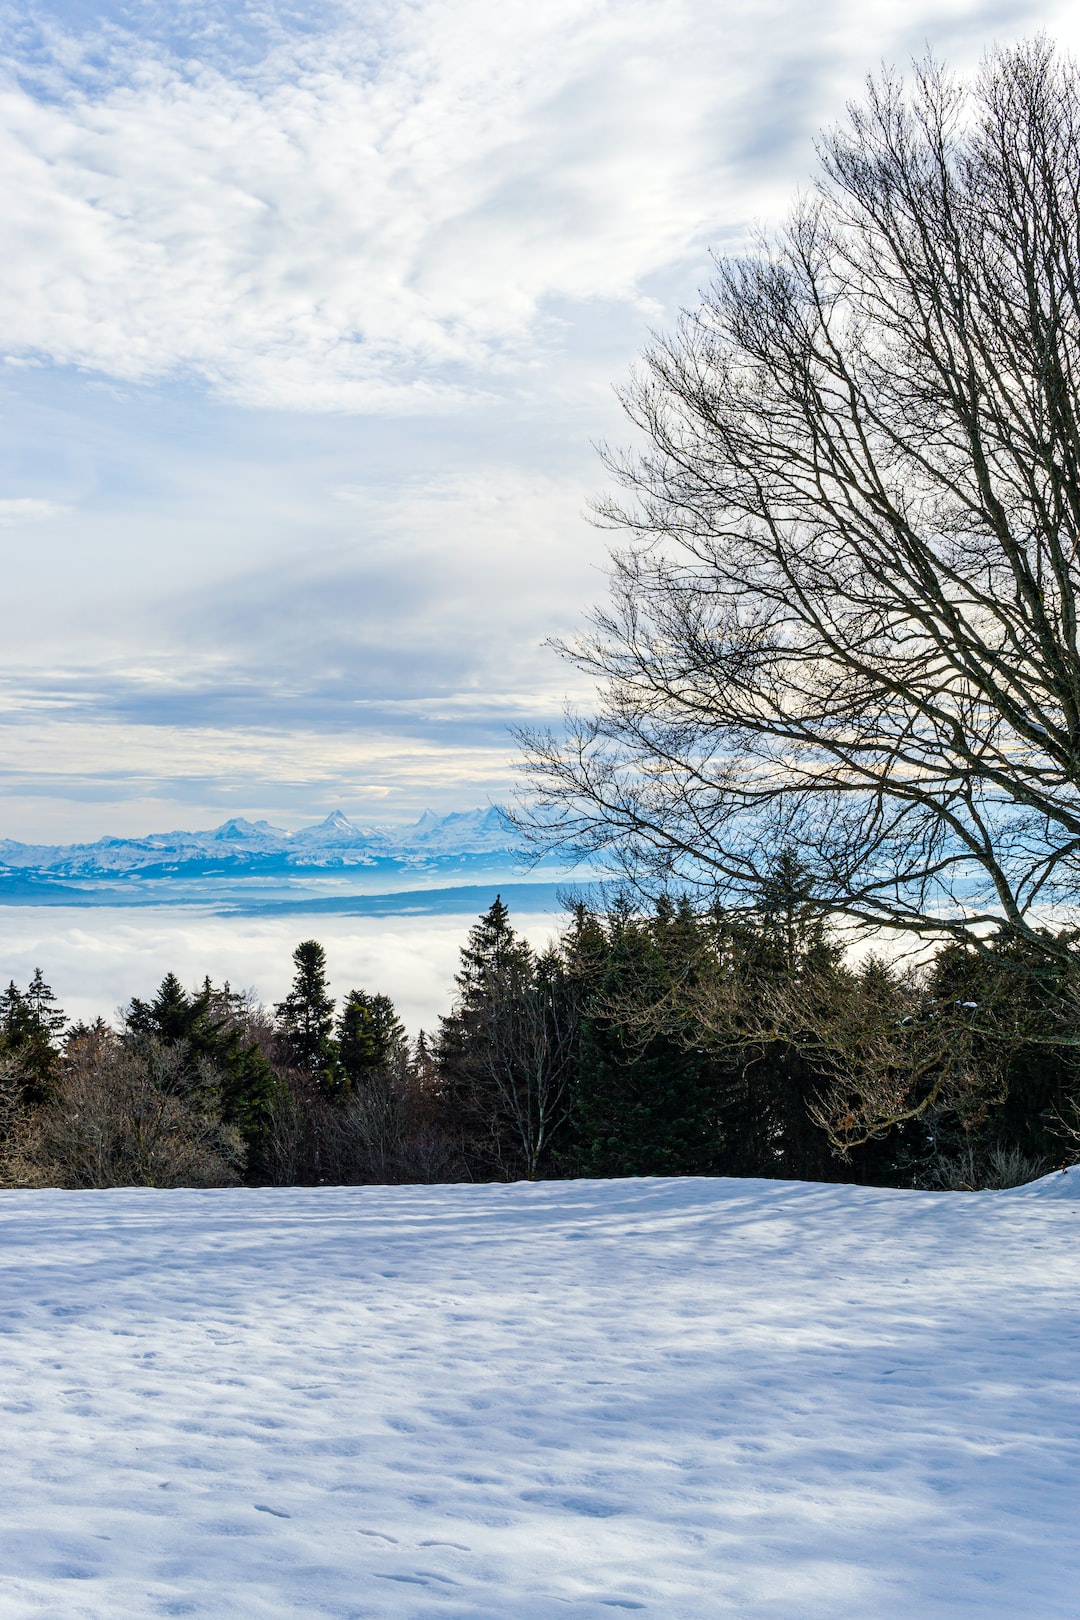 Winter scene with the Swiss Alps as a backdrop